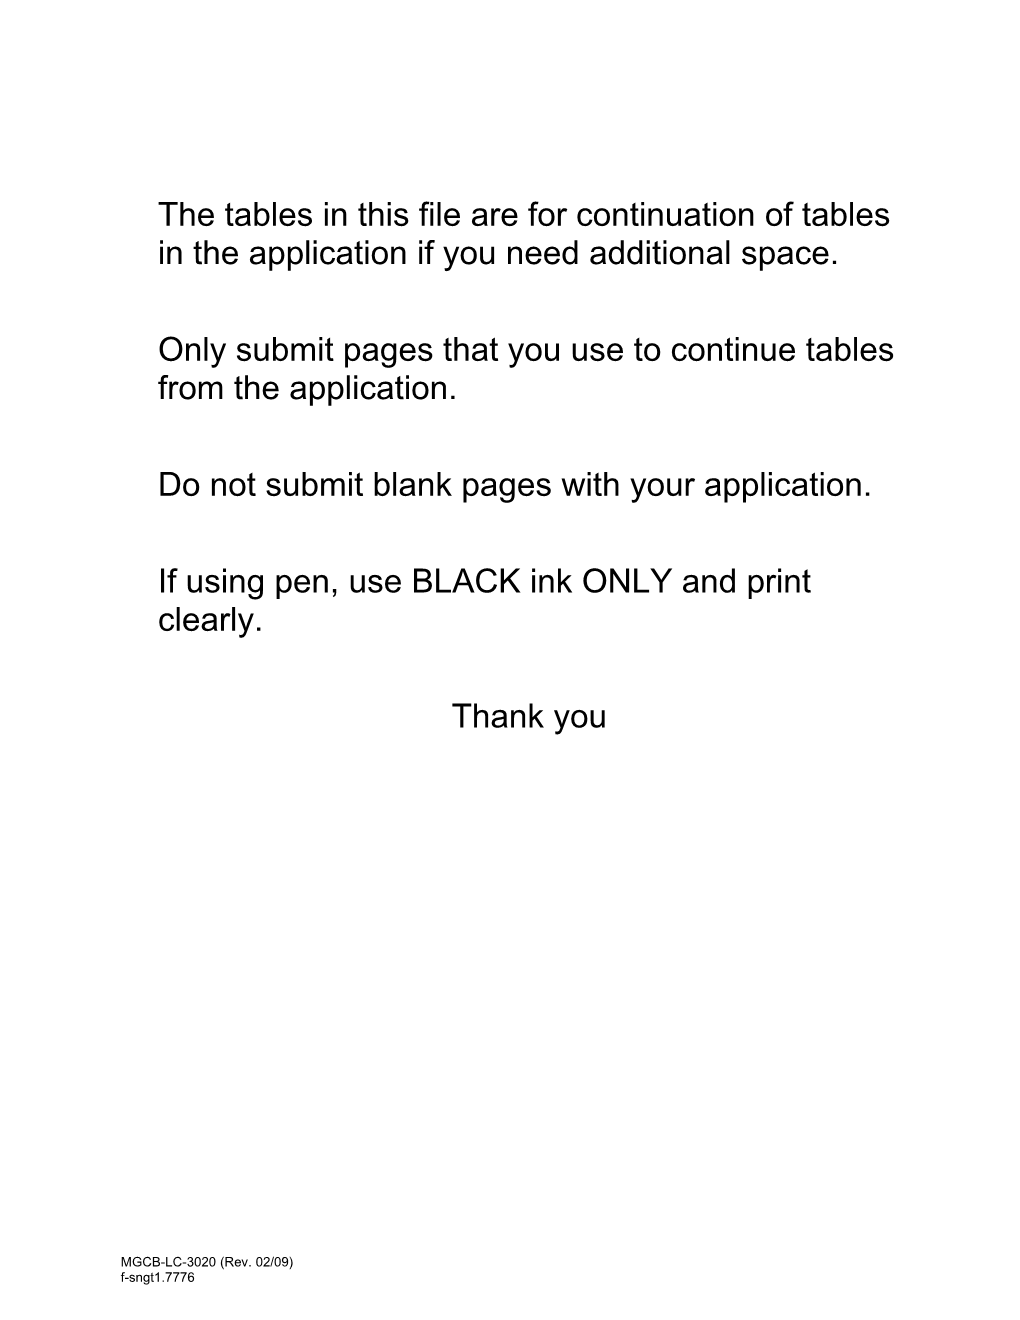 Only Submit Pages That You Use to Continue Tables from the Application